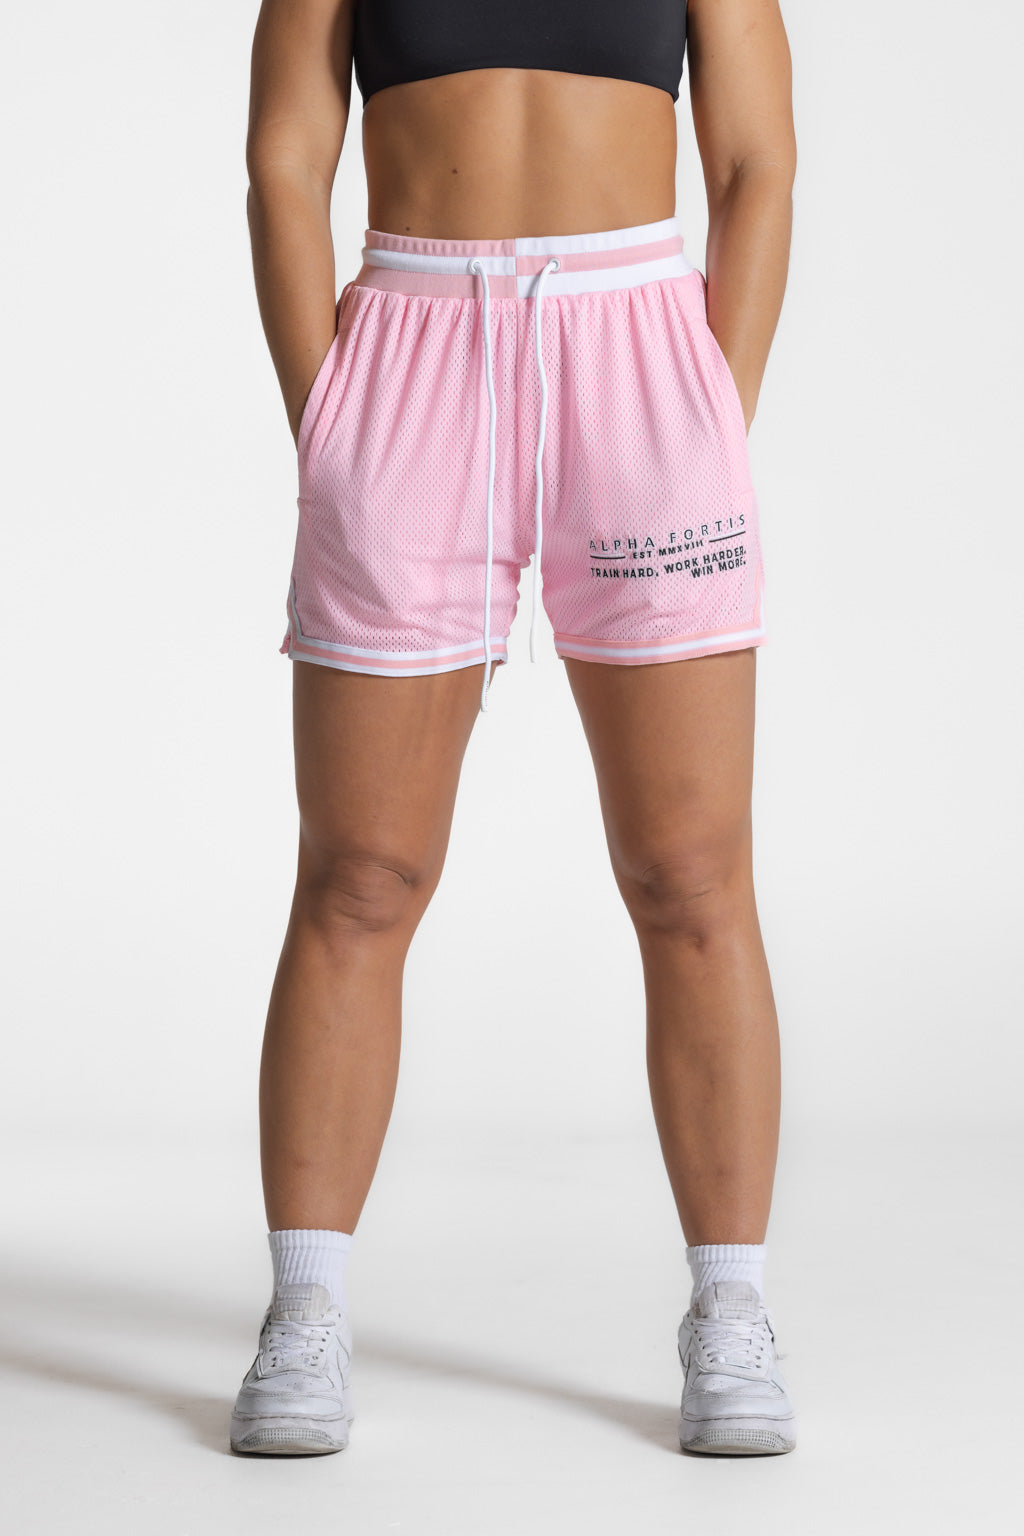 Unbounded Basketball Shorts [S]